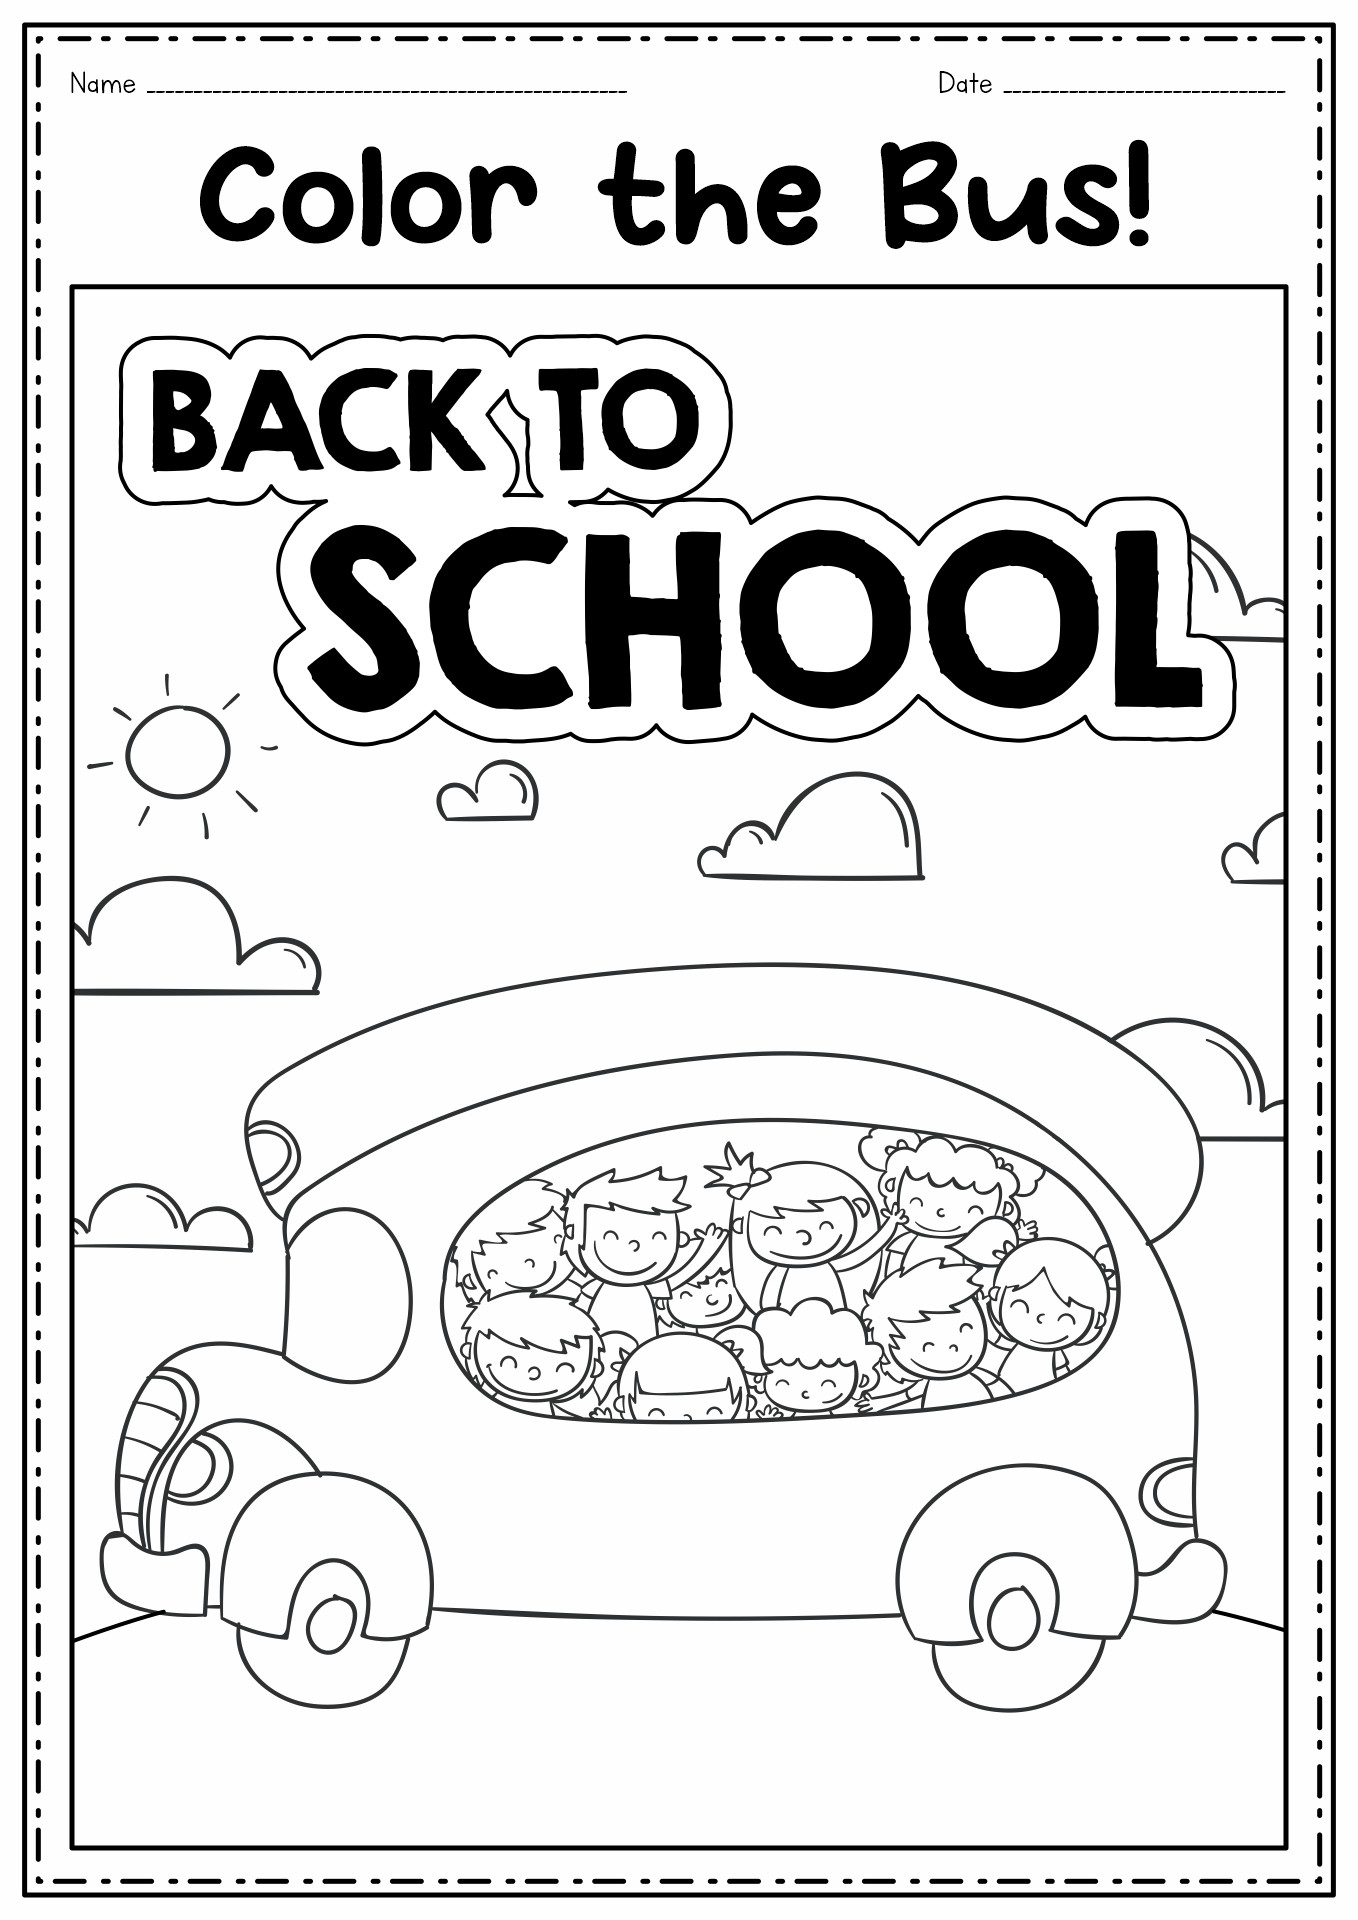 Back to School Coloring Pages Printable Image